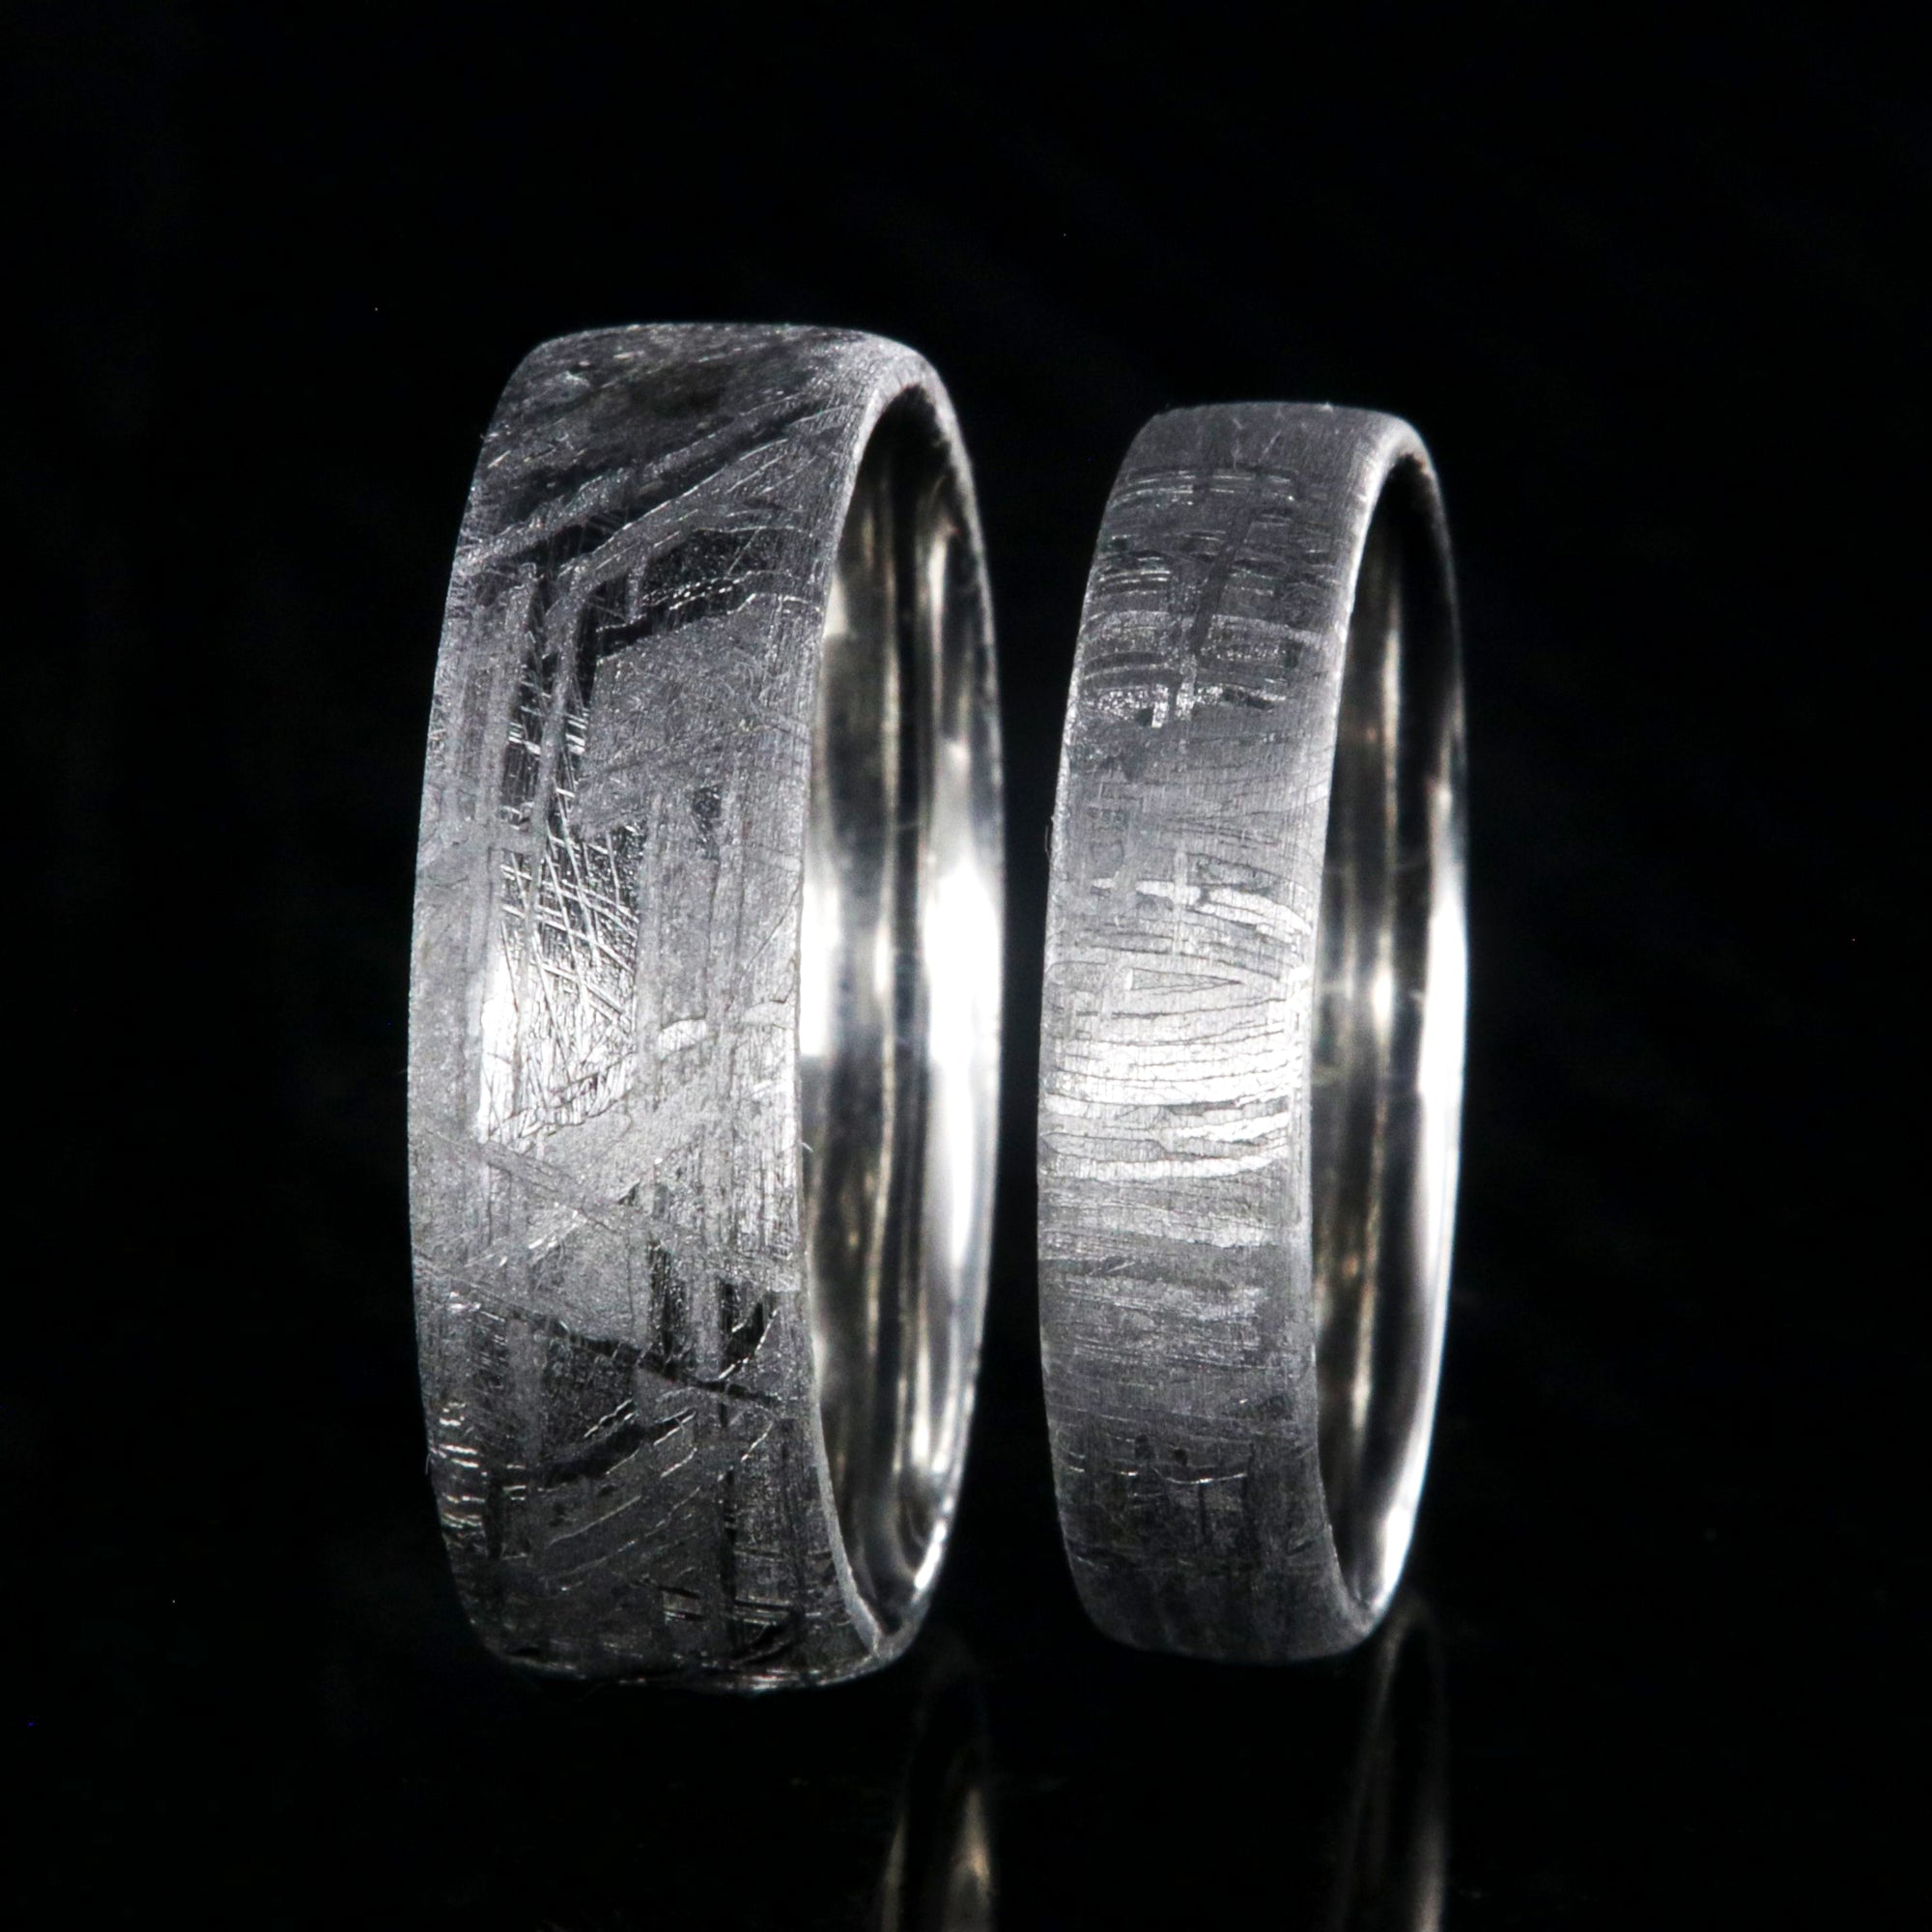 His and her matching ring set with a 7mm wide and 5mm wide Gibeon meteorite rings